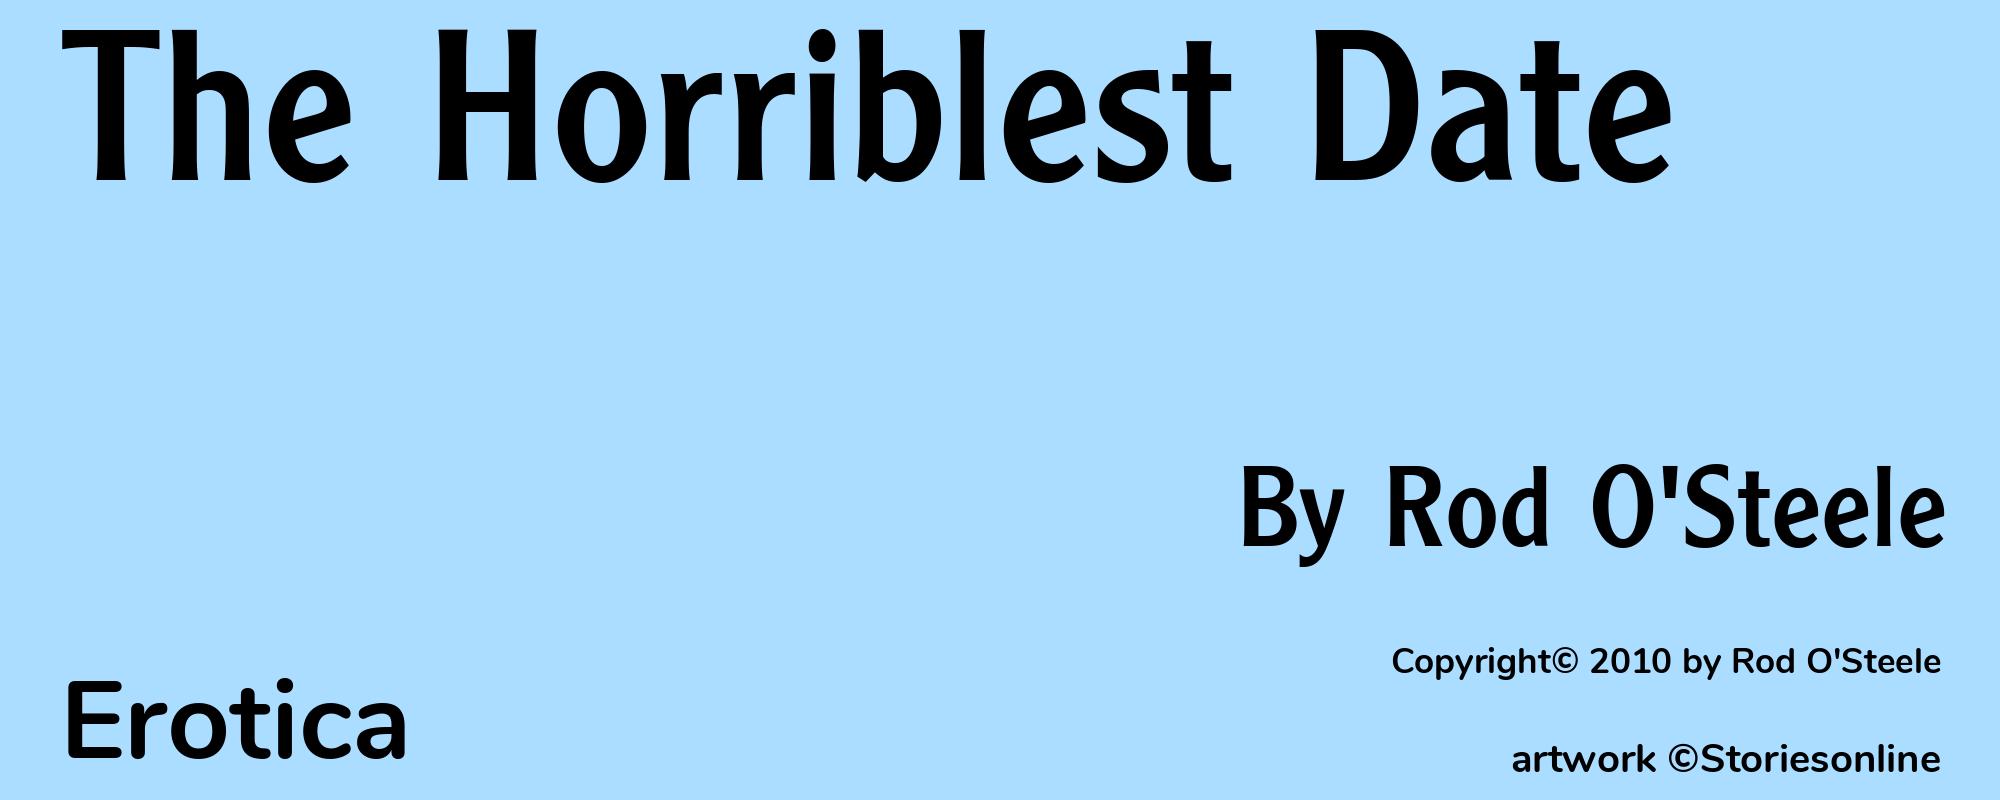 The Horriblest Date - Cover